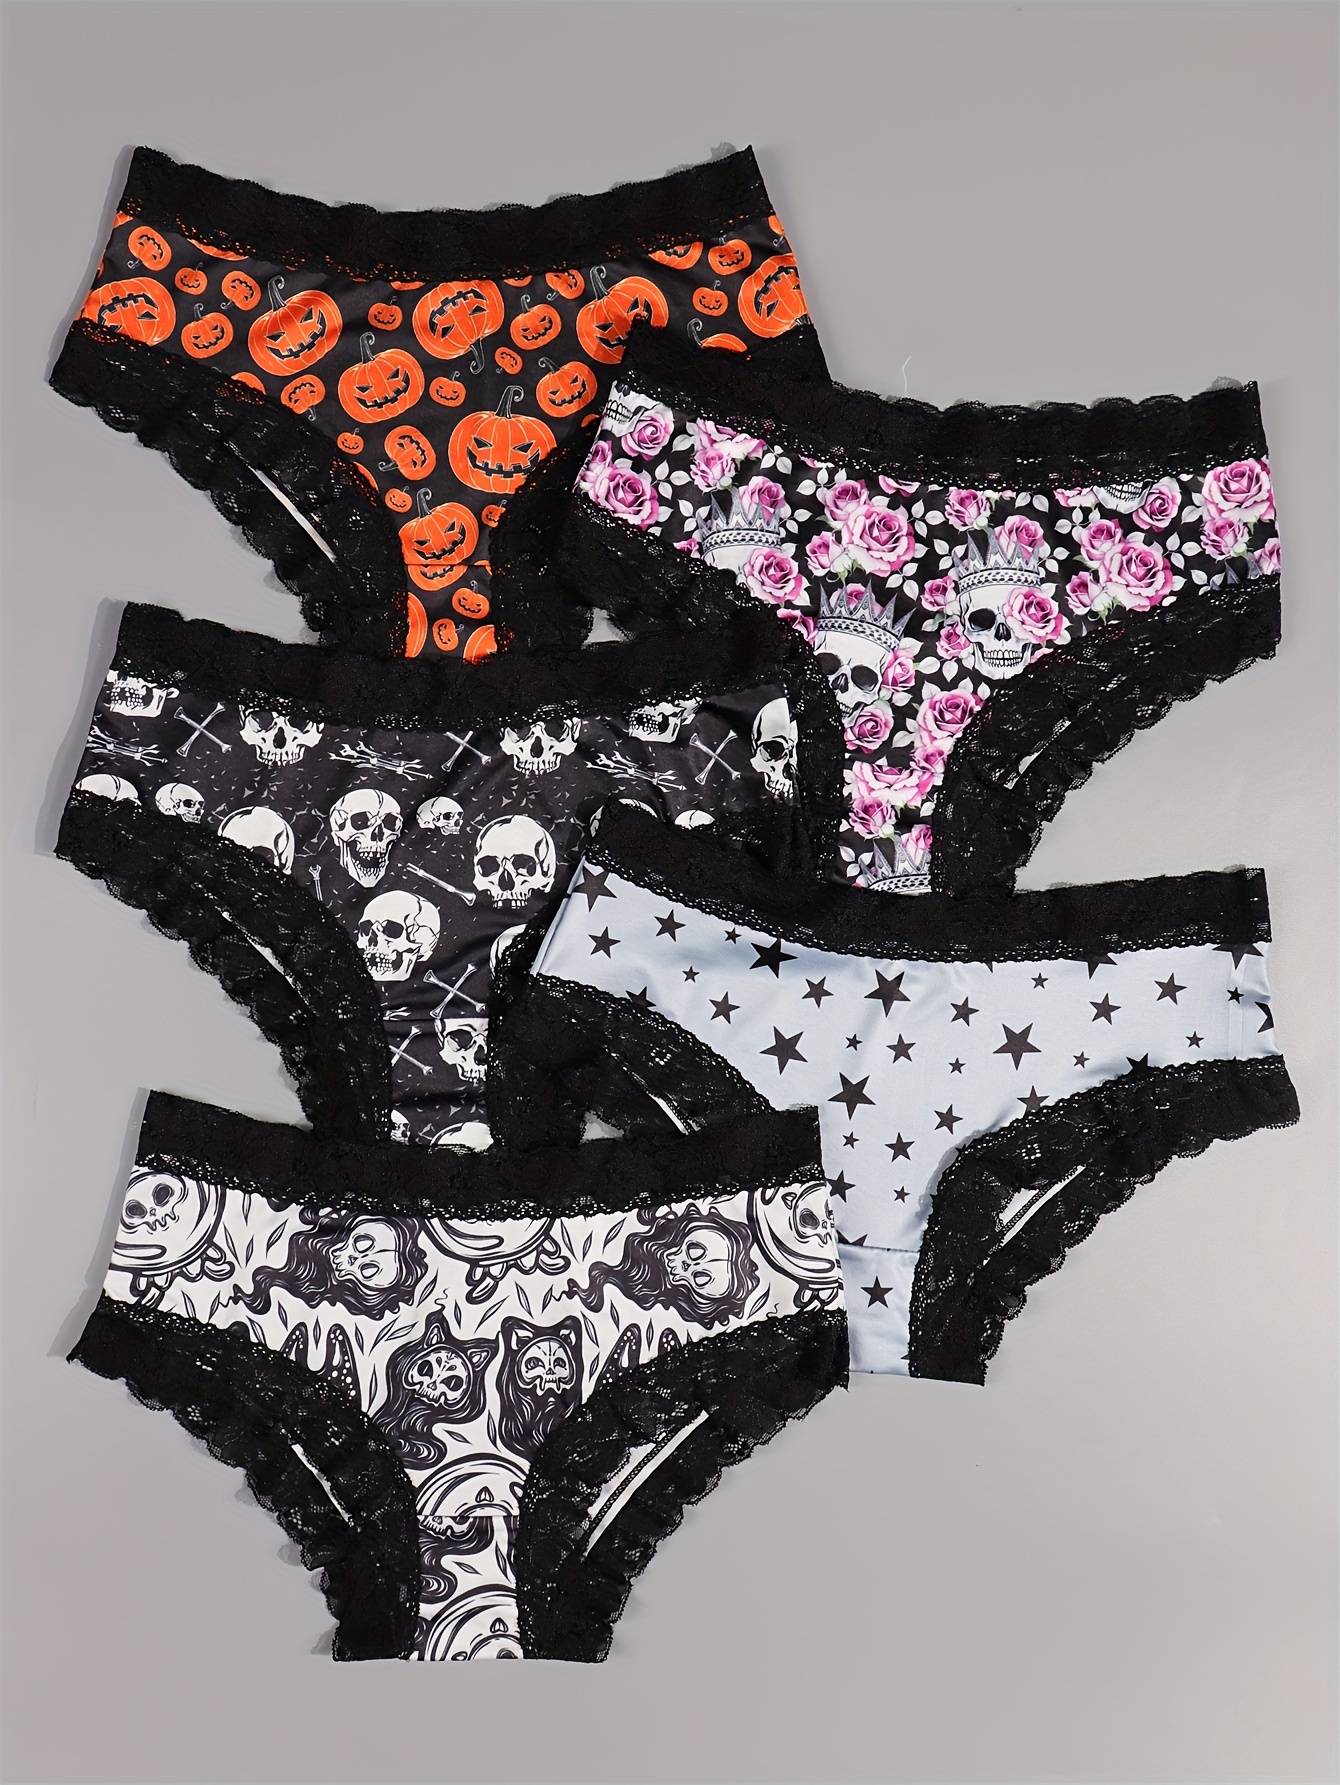 SKULL KNICKERS BRIEFS ONE SIZE SMALL 🇬🇧 GOTHIC PUNK EMO GRUNGE